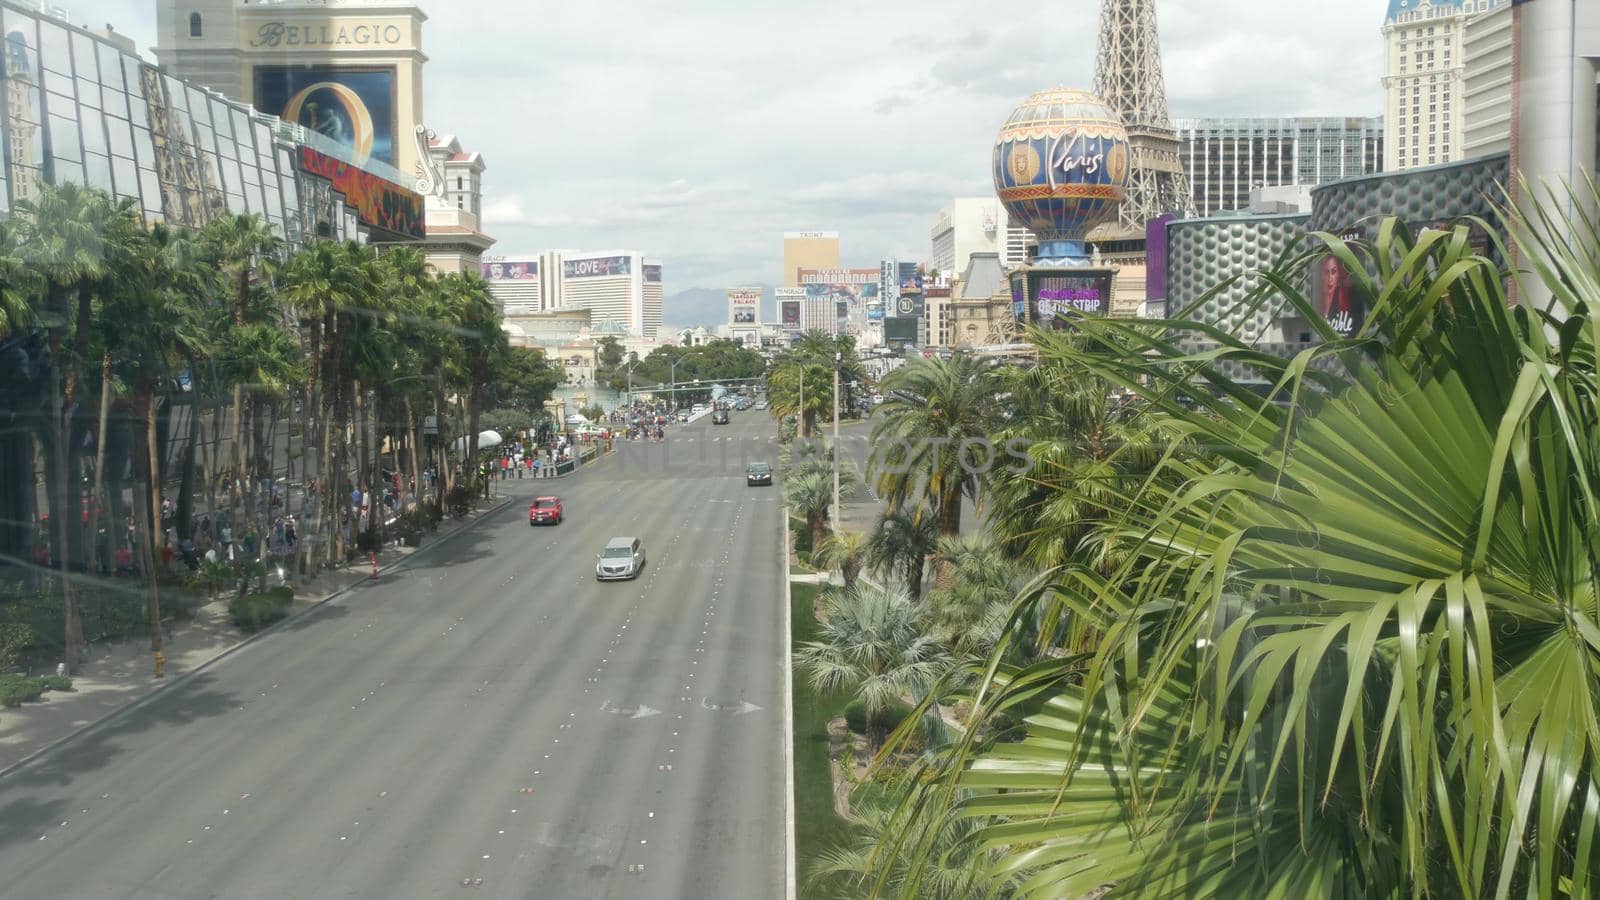 LAS VEGAS, NEVADA USA - 7 MAR 2020: The Strip boulevard with luxury casino and hotels in gambling sin city. Car traffic on road to Fremont street in tourist money playing resort. People walking.